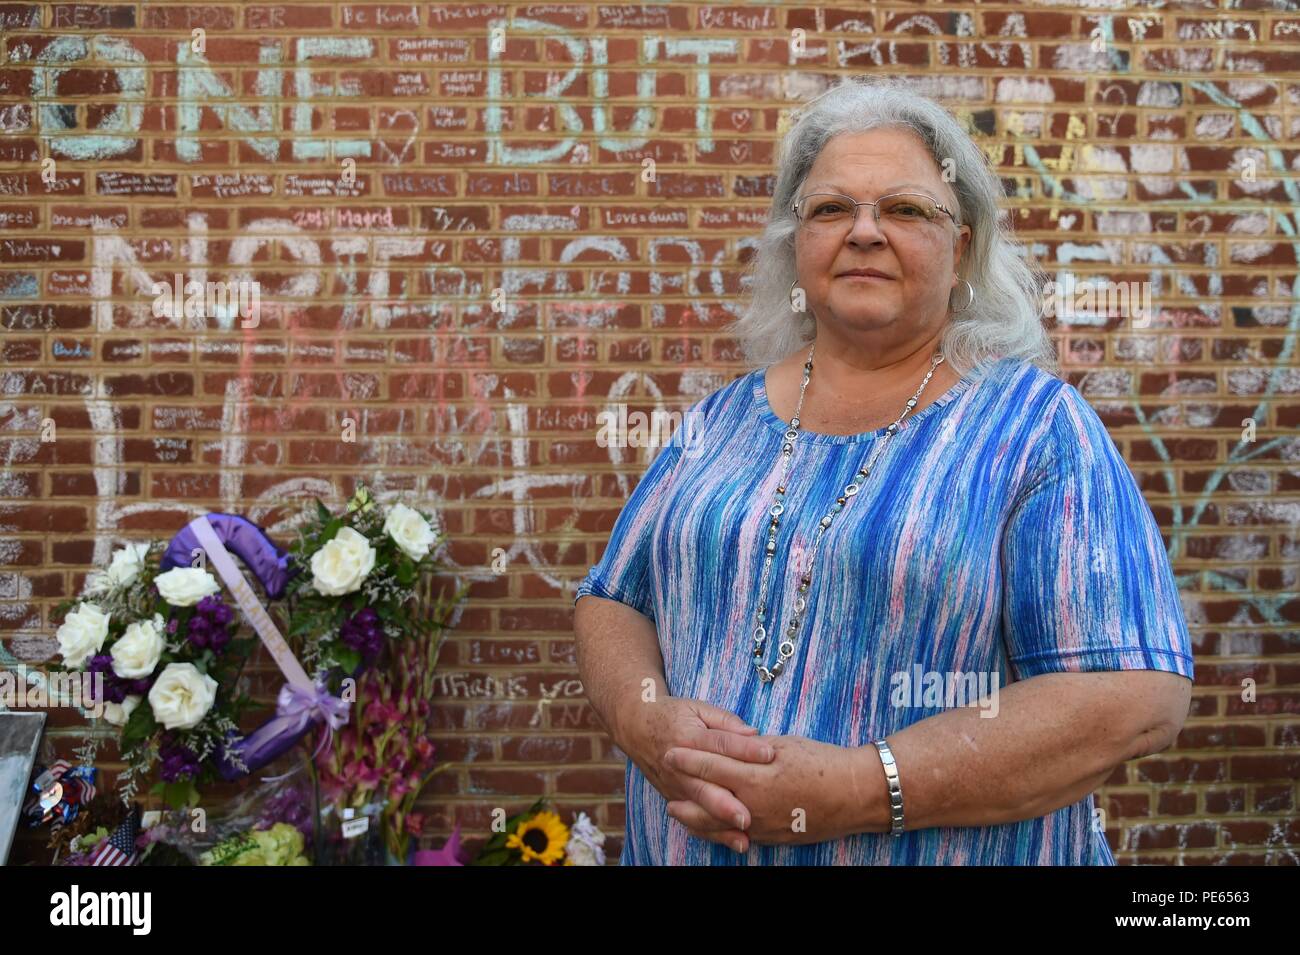 (180812) -- WASHINGTON, Aug. 12, 2018 (Xinhua) -- Susan Bro, mother of Heather Heyer, is seen at the street corner where her daughter was killed in Charlottesville, Virginia, the United States, on Aug. 10, 2018. A year after a white nationalist rally traumatized Charlottesville, in the U.S. state of Virginia, with riots and blood, the city is still healing from the shock. On Aug. 12, 2017, white supremacists and members of other hate groups gathered in Charlottesville for a self-styled 'Unite the Right' rally to protest against the city's decision to remove a Confederate statue before clashing Stock Photo